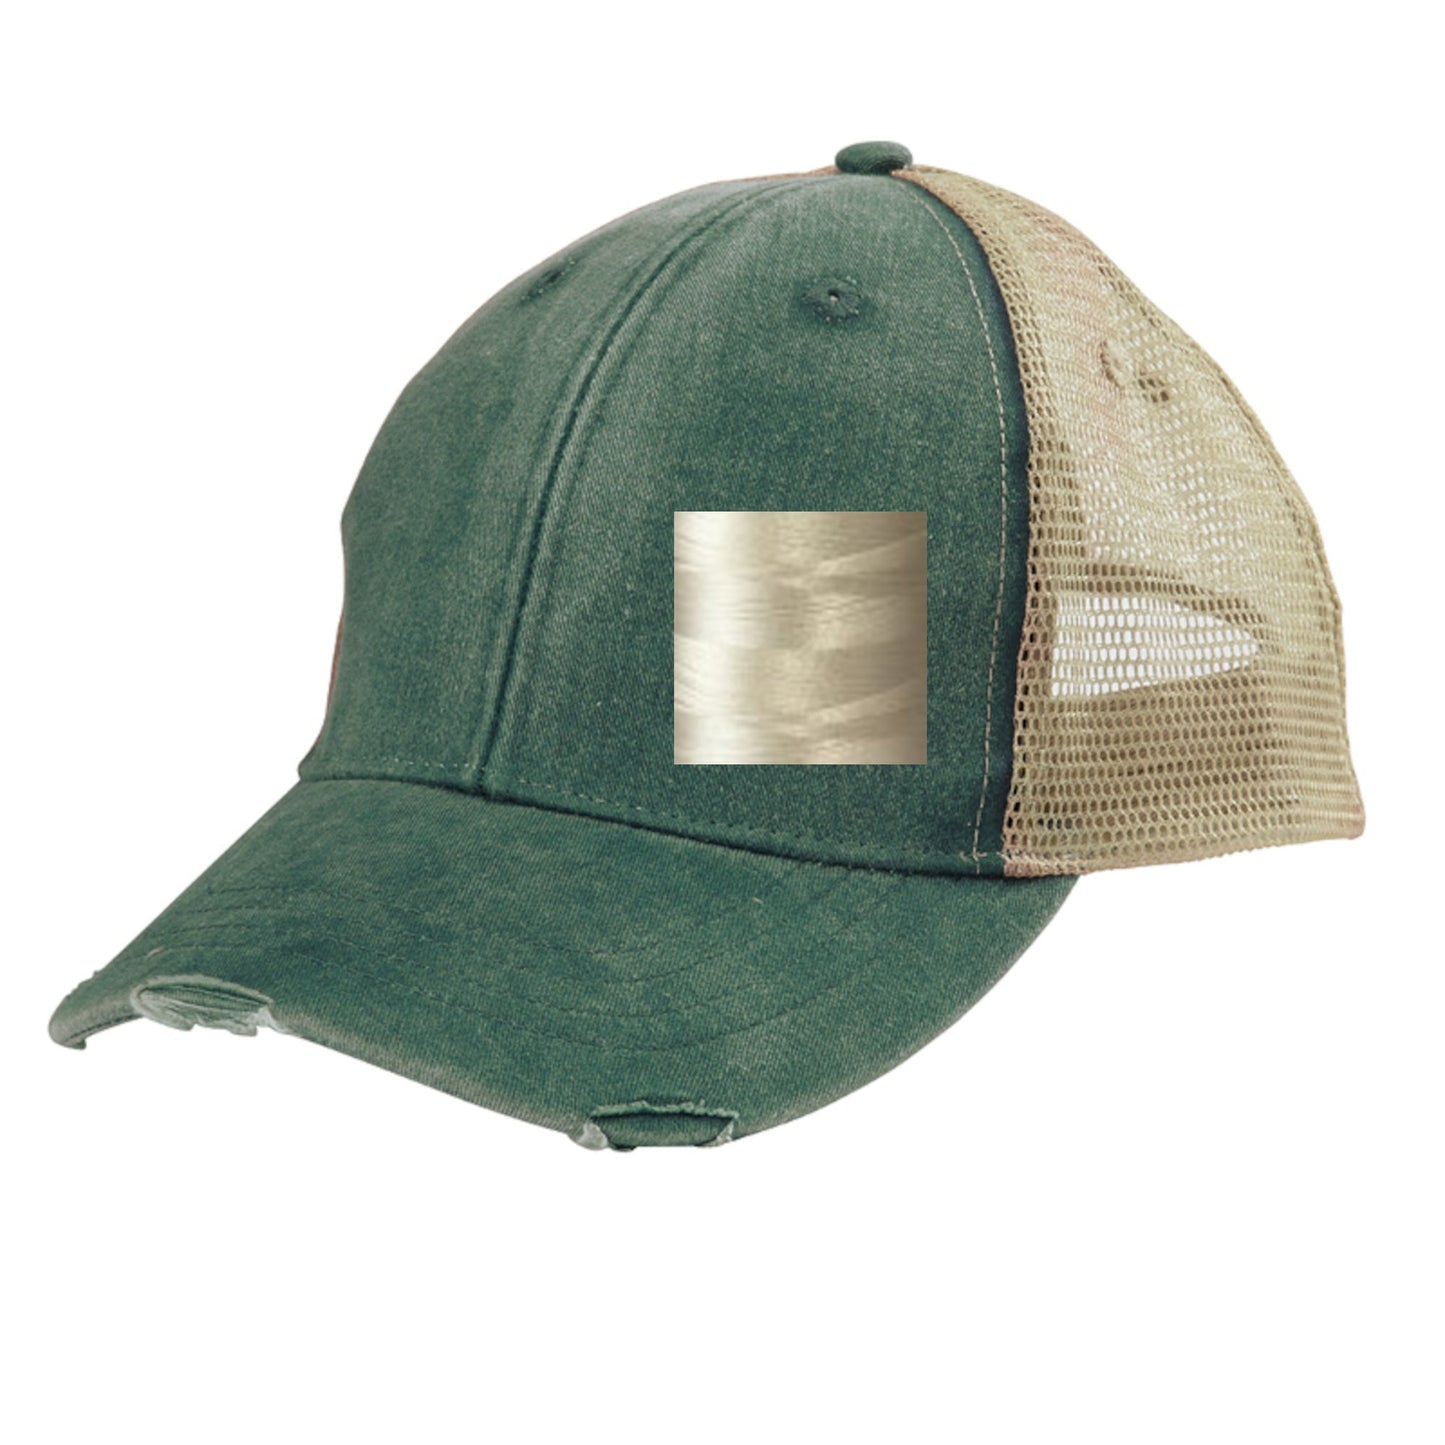 Oregon Hat | Distressed Snapback Trucker | state cap | many color choices